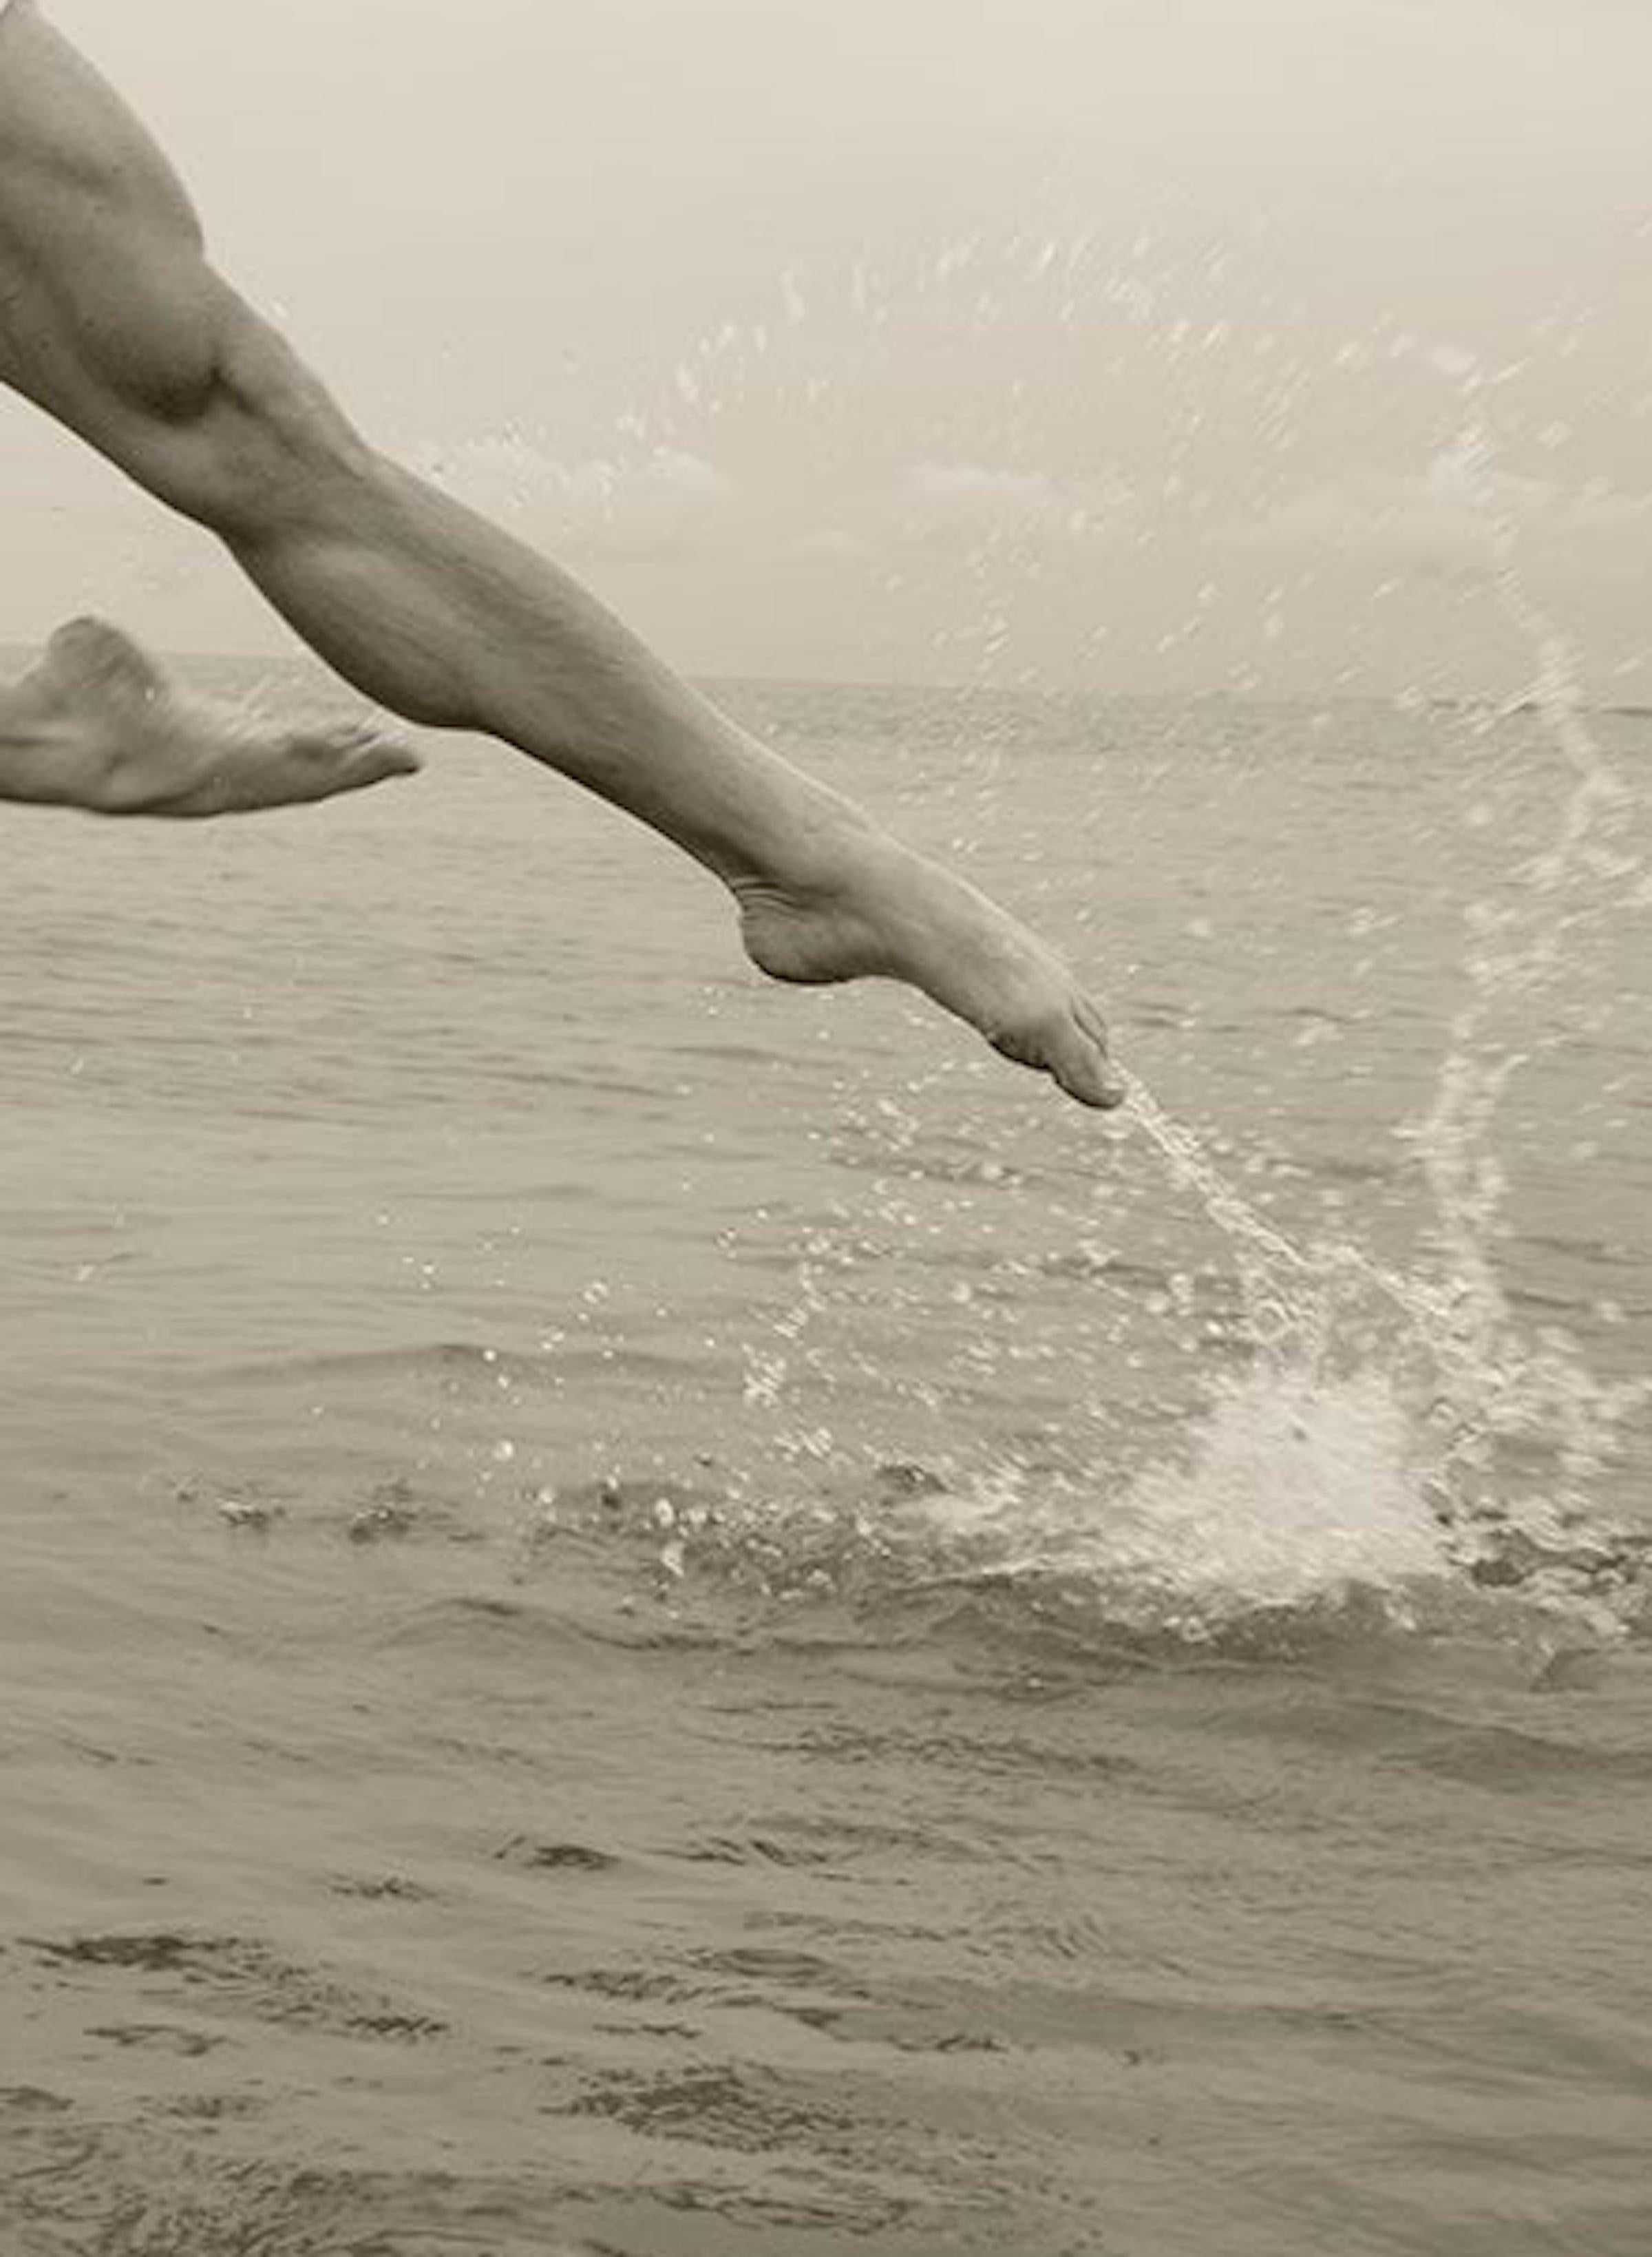 Man on Water,  Dancer.  Limited Edition Sepia Photograph - Beige Nude Photograph by Ricky Cohete